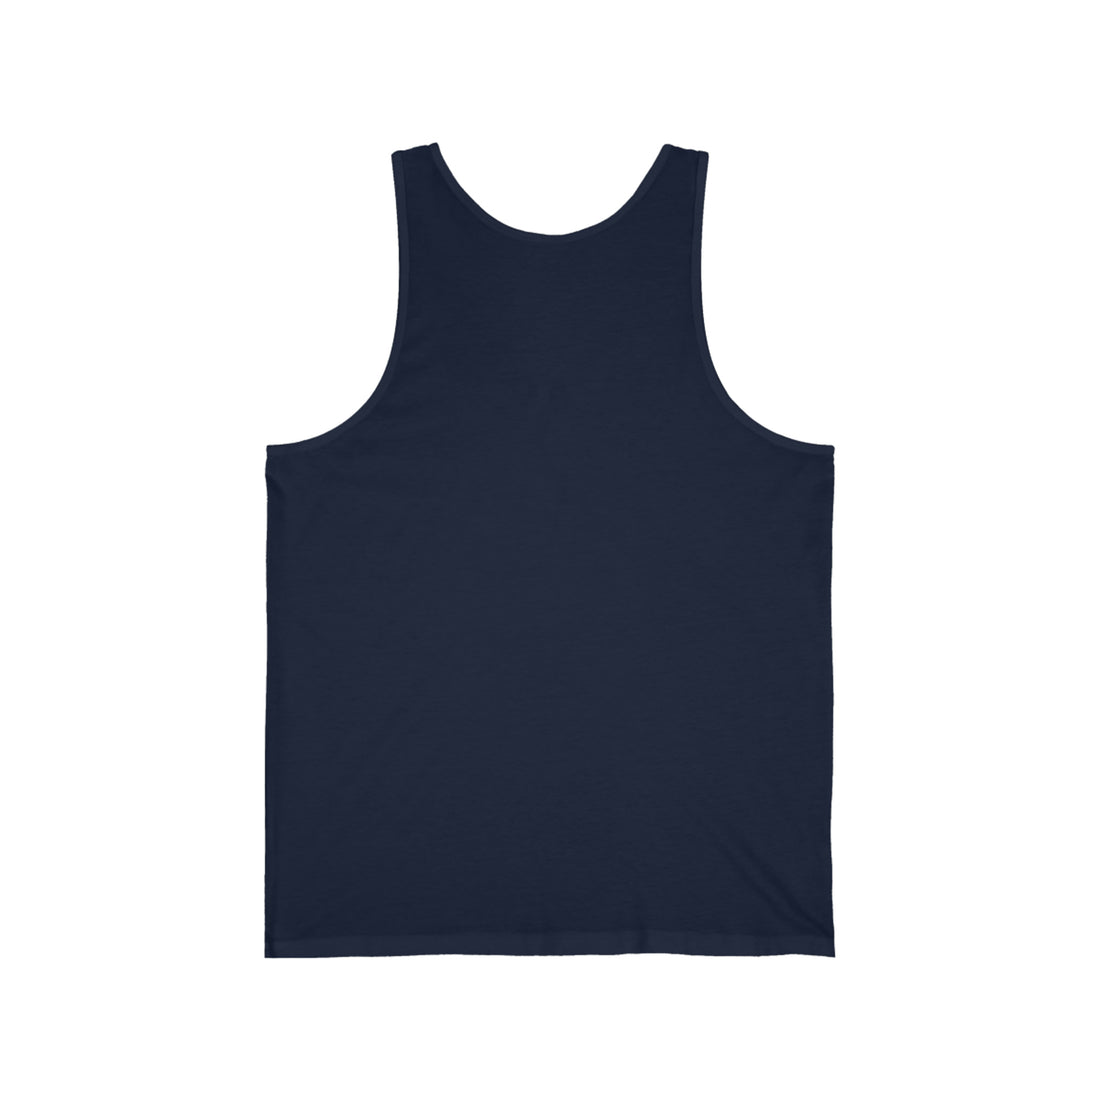 Covid-19 Is A Lake Compared To The Ocean That Is Cancer - Unisex Jersey Tank Top